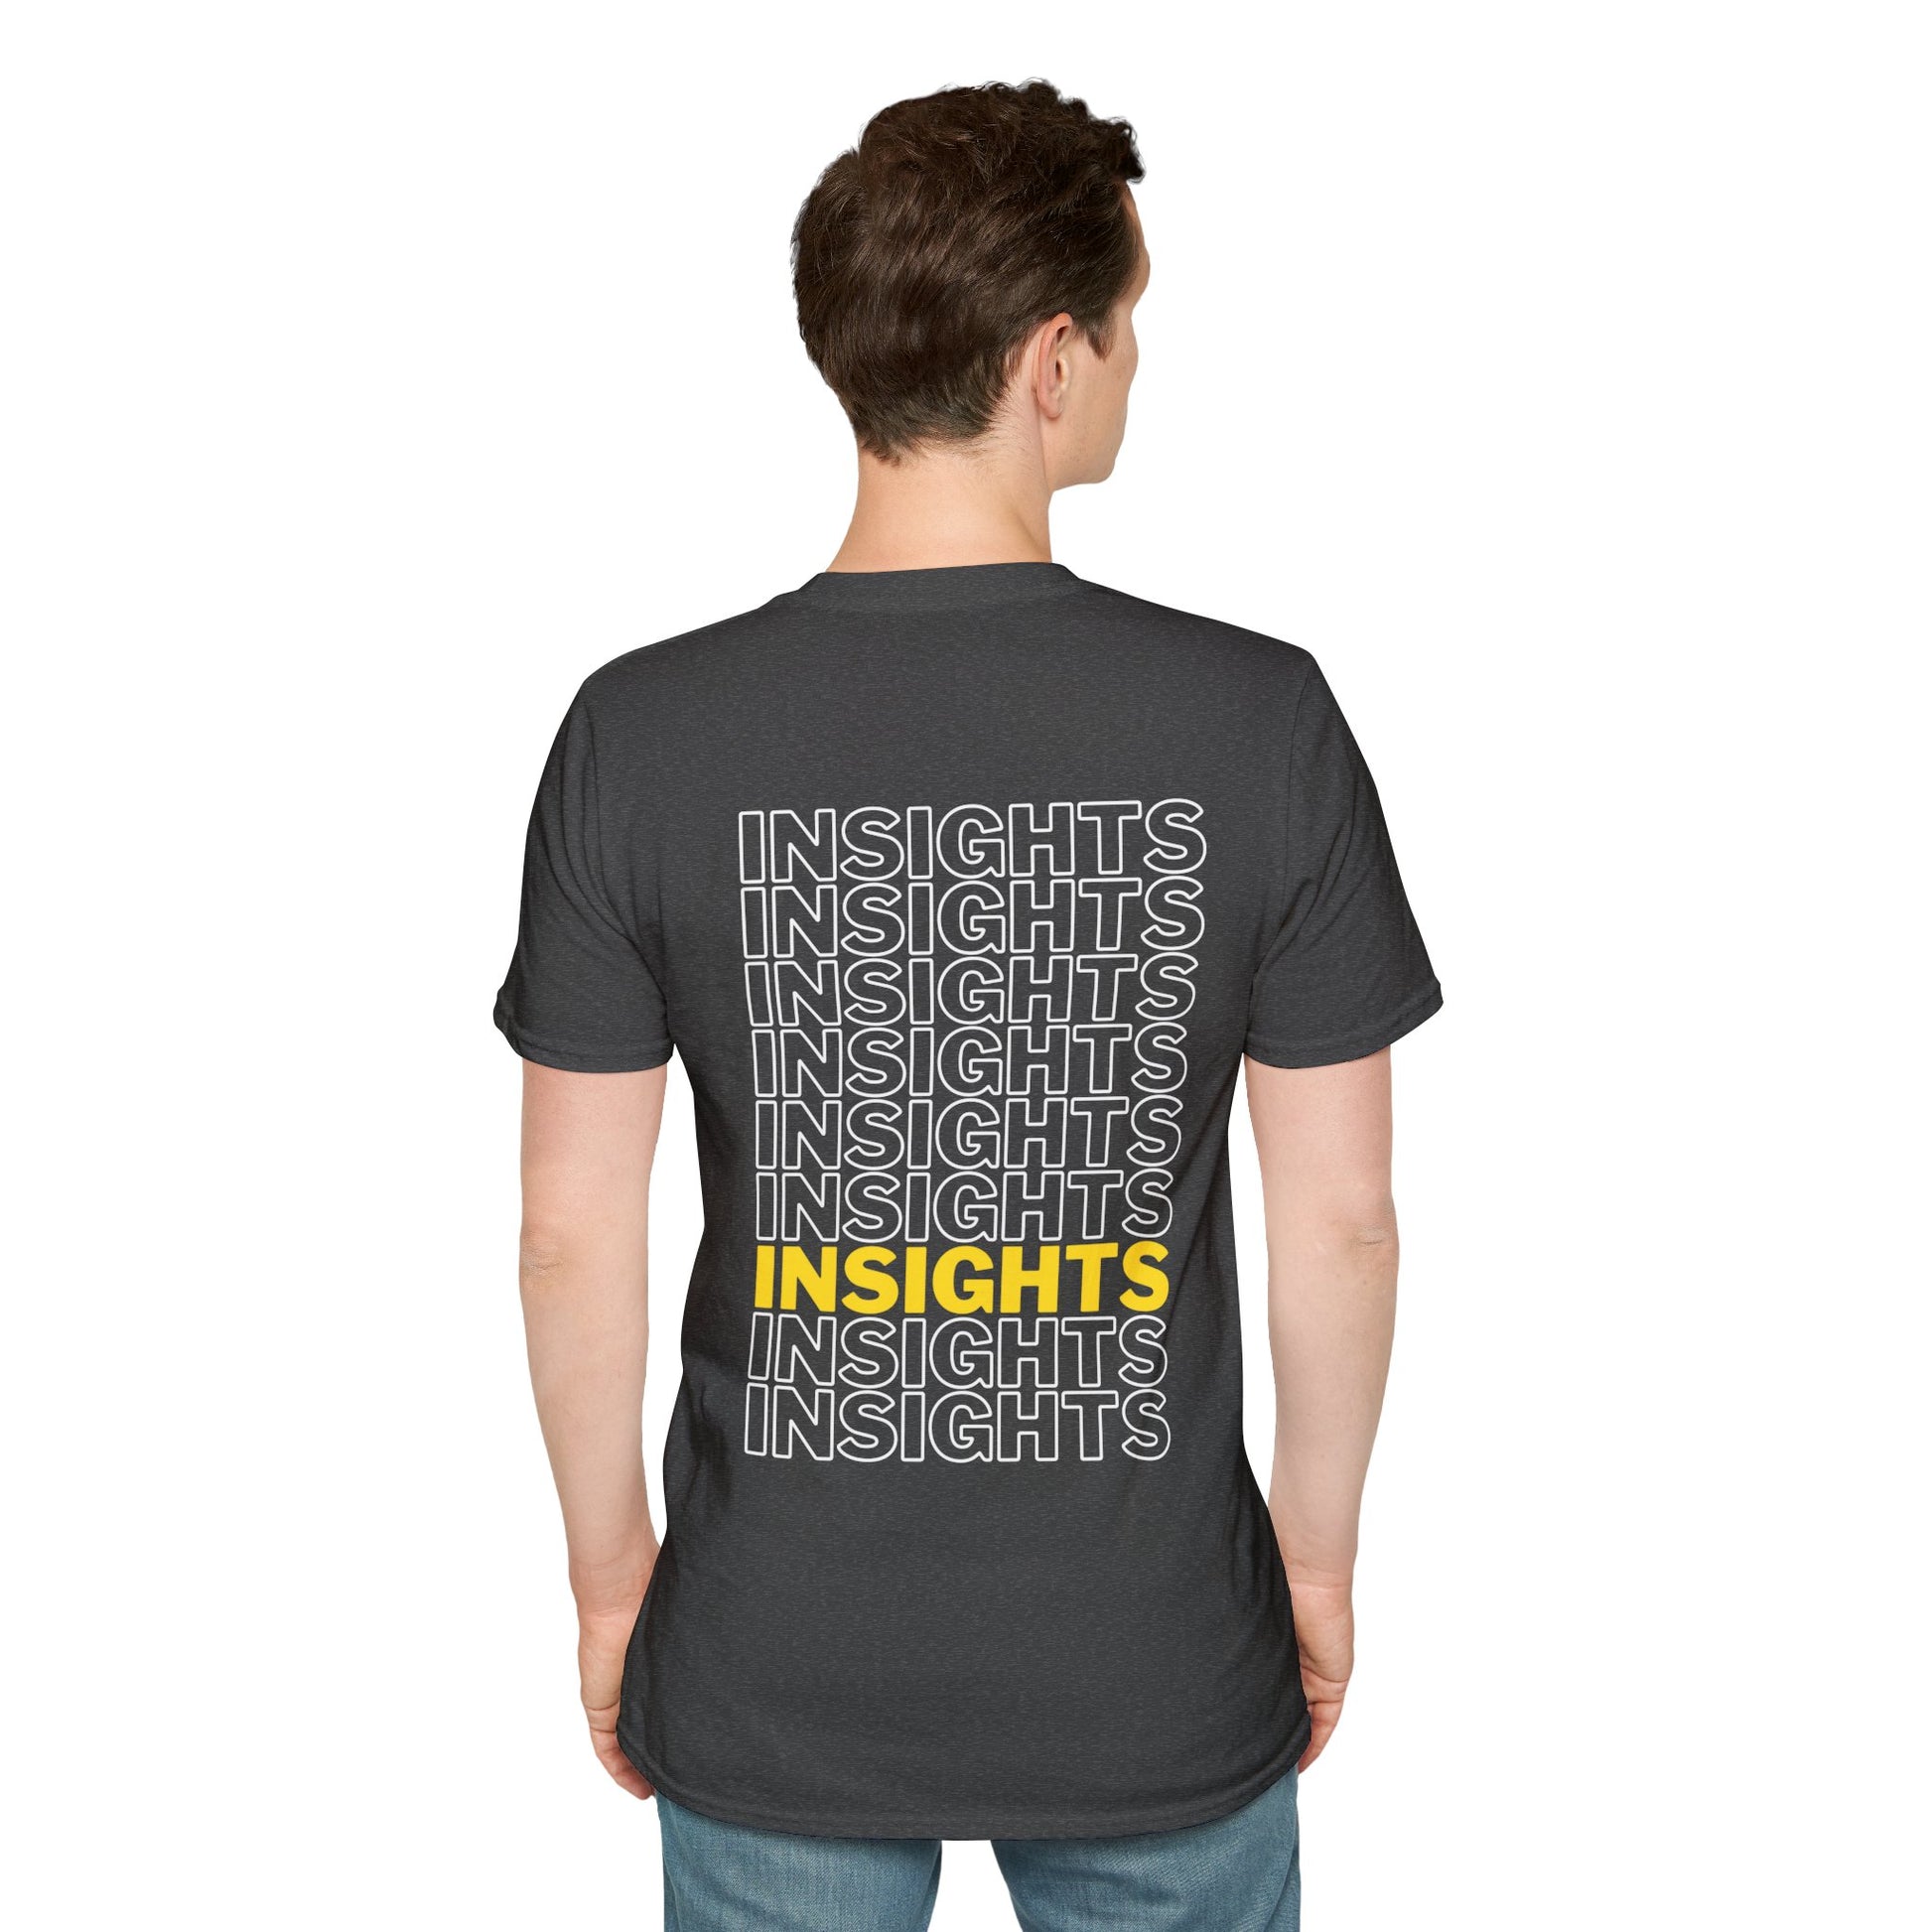 Dark Grey T-shirt with the word ‘INSIGHTS’ repeated in white text and one instance highlighted in yellow